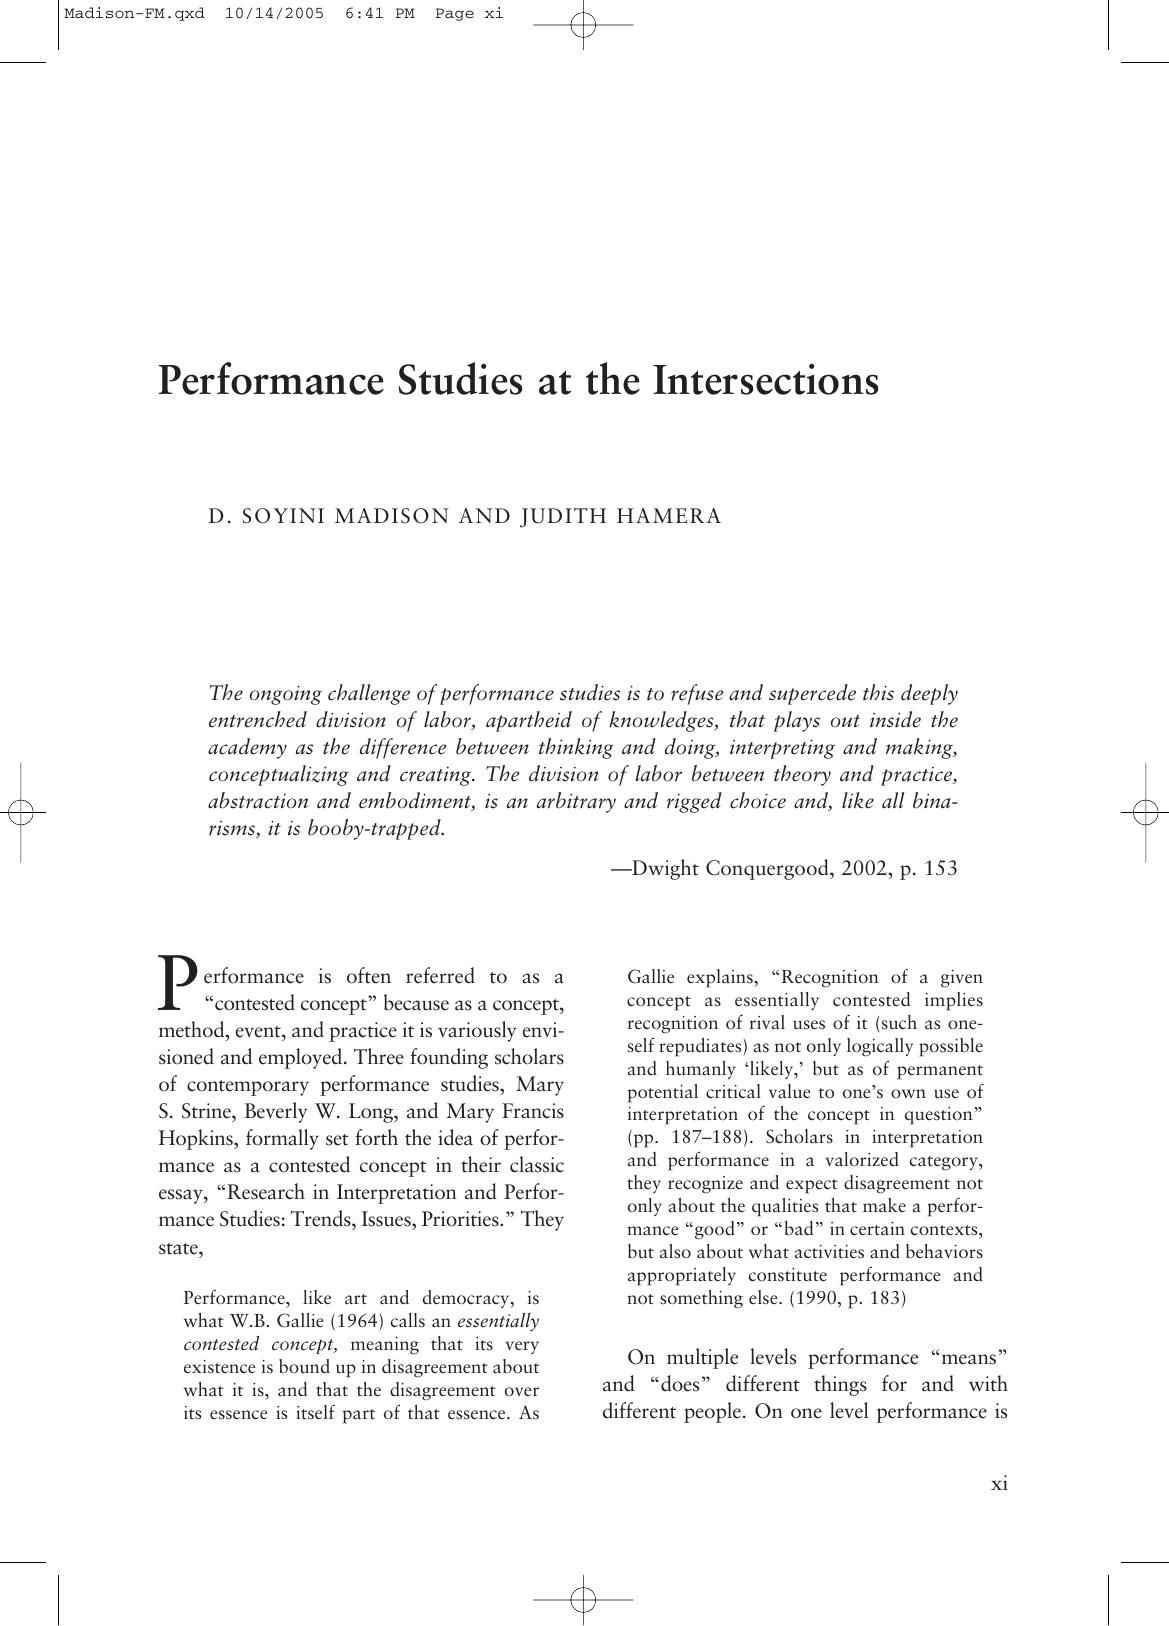 Performance study & the interjection 2005